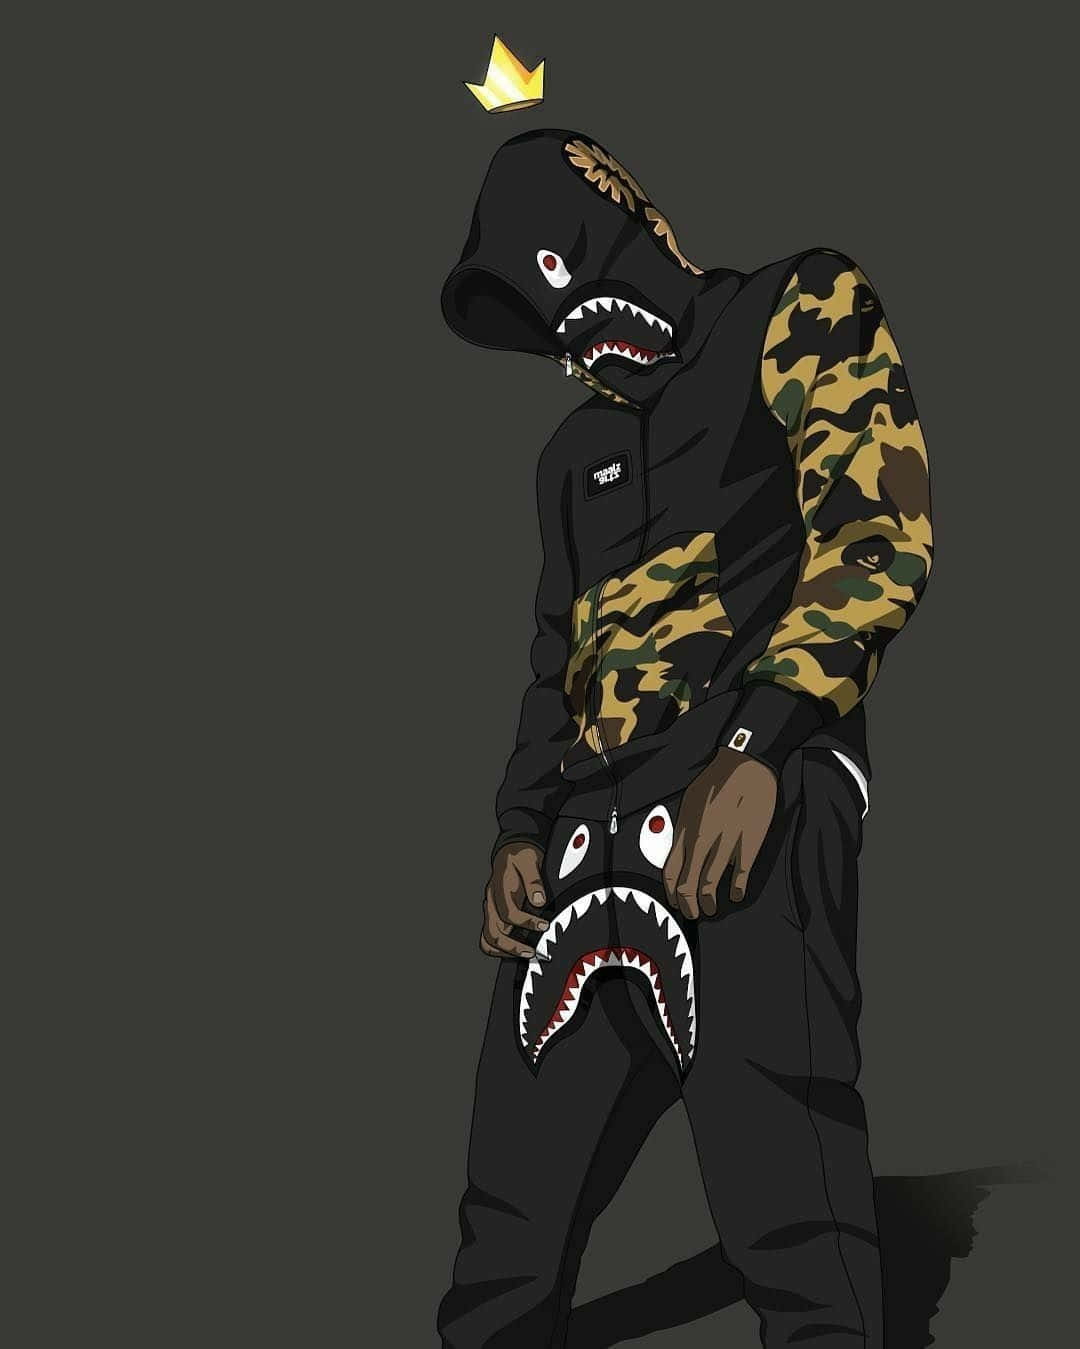 Download A Bathing Ape In Camo With A Shark On His Head | Wallpapers.com